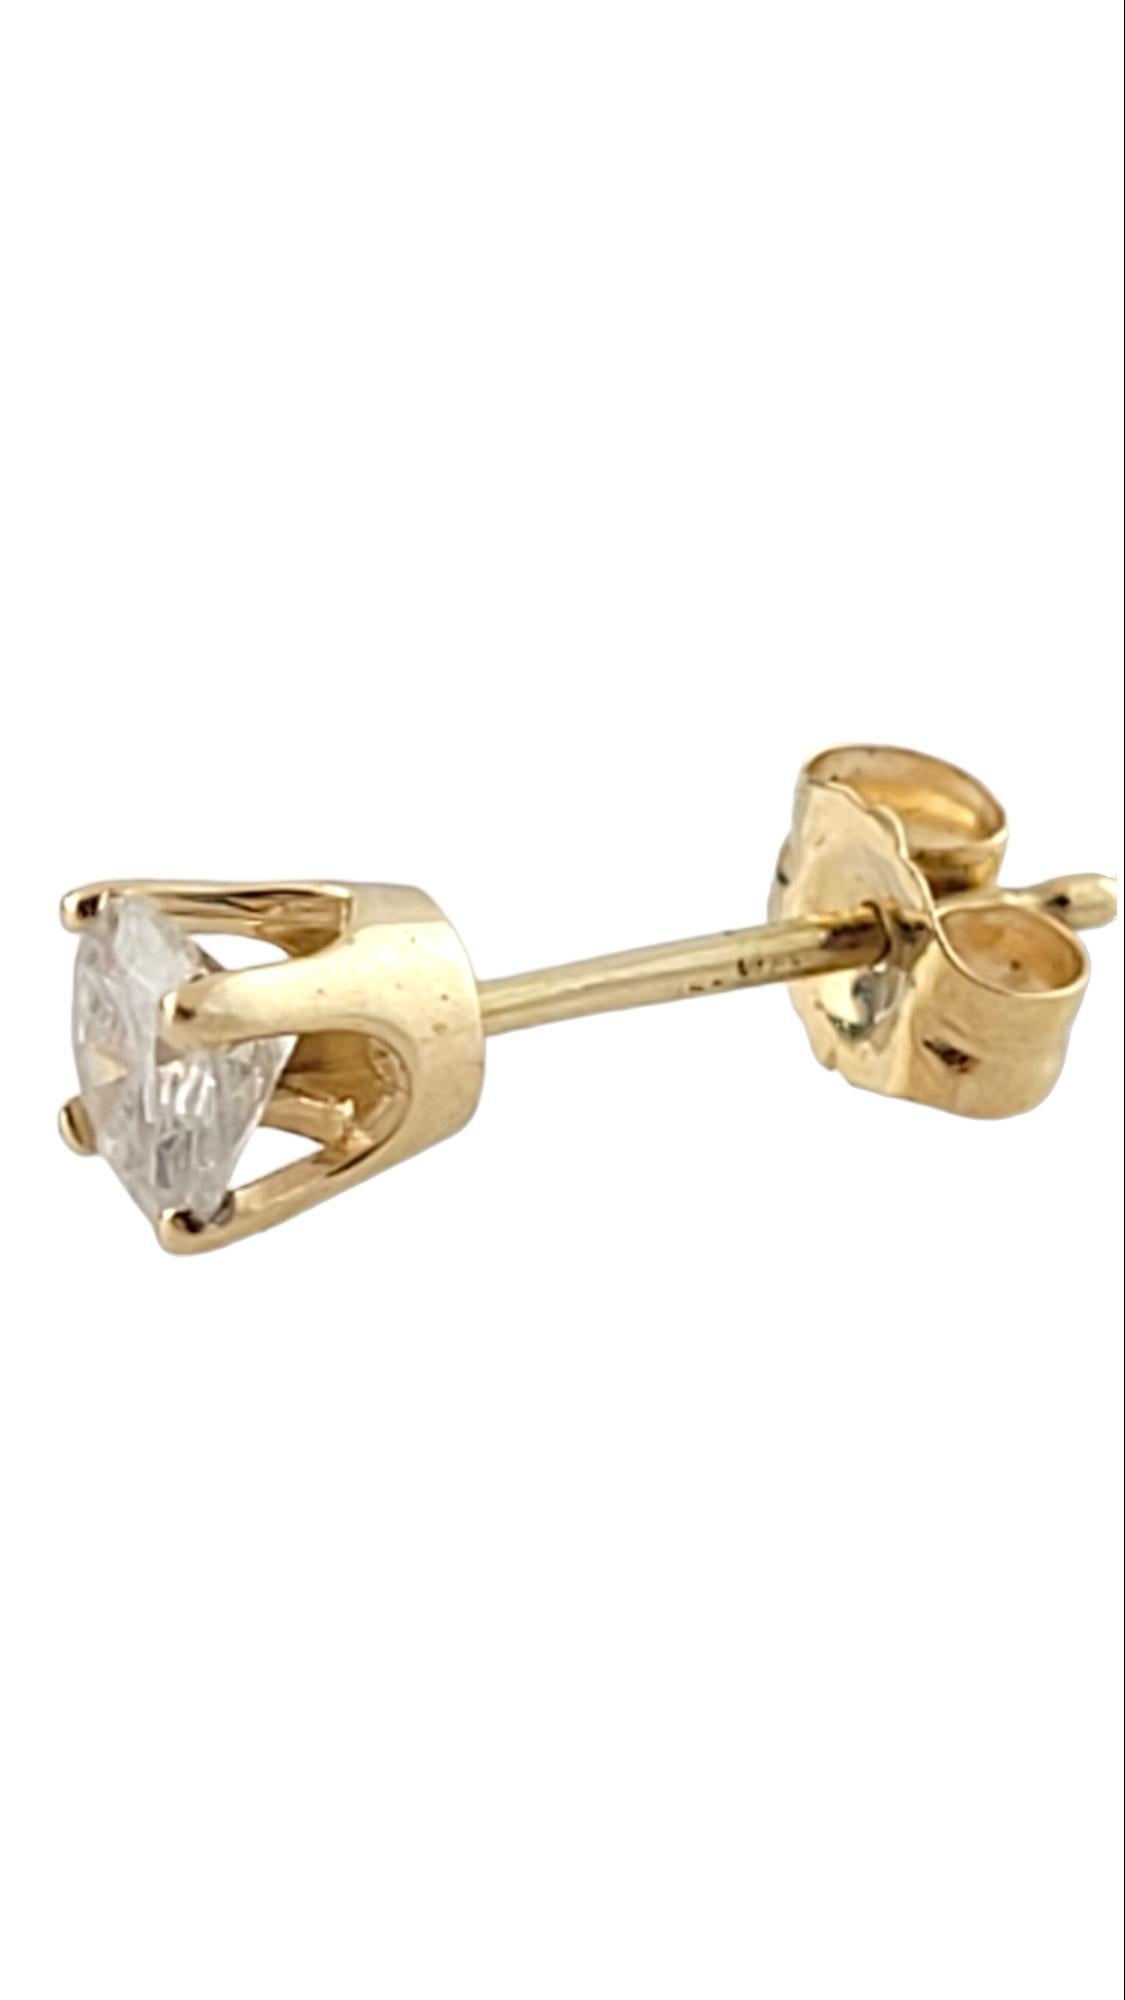 14K Yellow Gold Diamond Stud

Gorgeous 14K gold stud with a sparkling round cut diamond!

Approximate total diamond weight: .24 cts

Diamond color: I

Diamond clarity: I2

Size: 3.8mm X 3.8mm

Weight: 0.32 g/ 0.2 dwt

Hallmark: 585

Very good